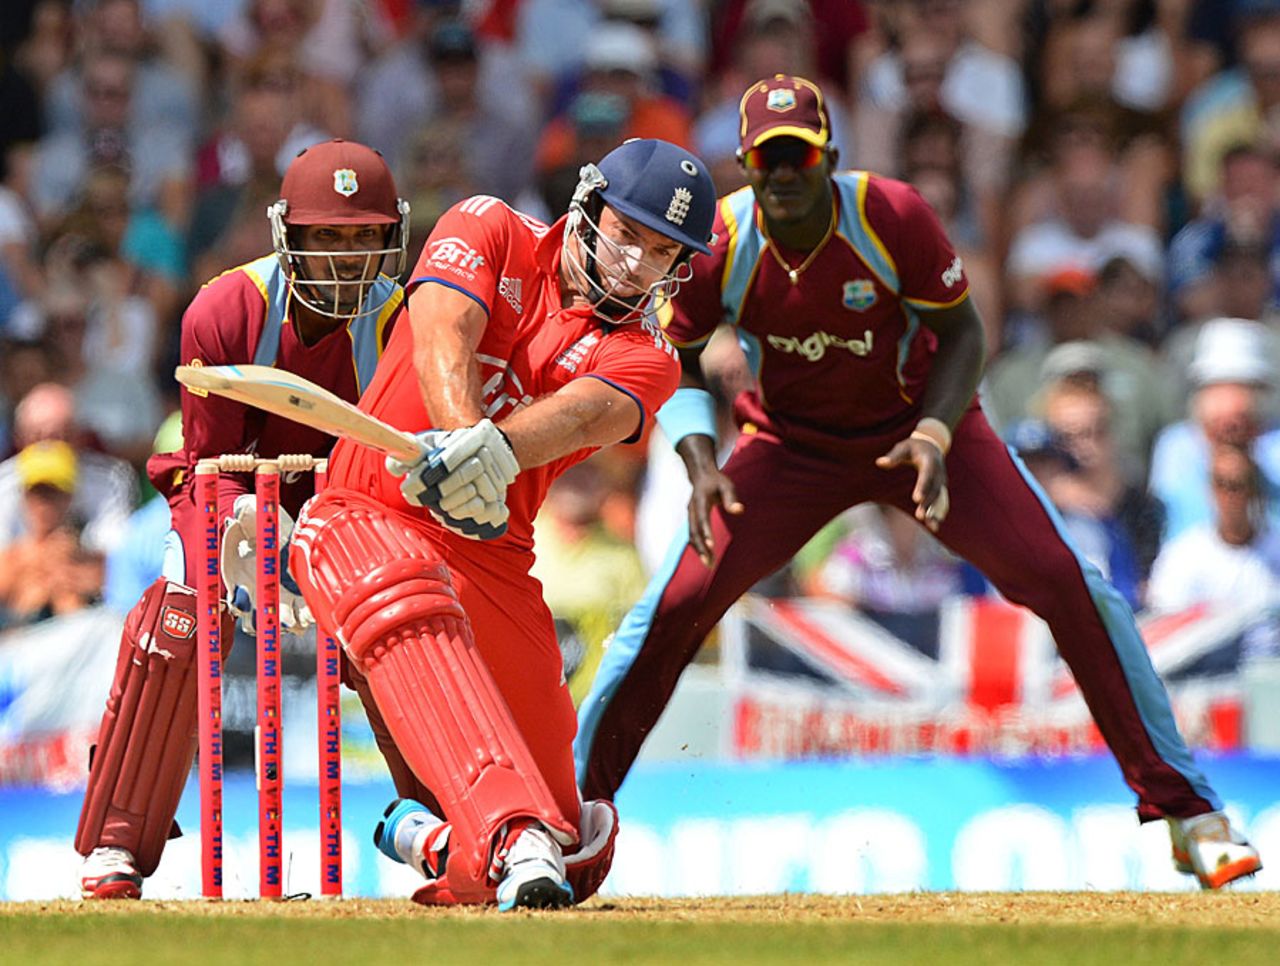 Michael Lumb goes for the slog, West Indies v England, 3rd T20, Barbados, March 13, 2014